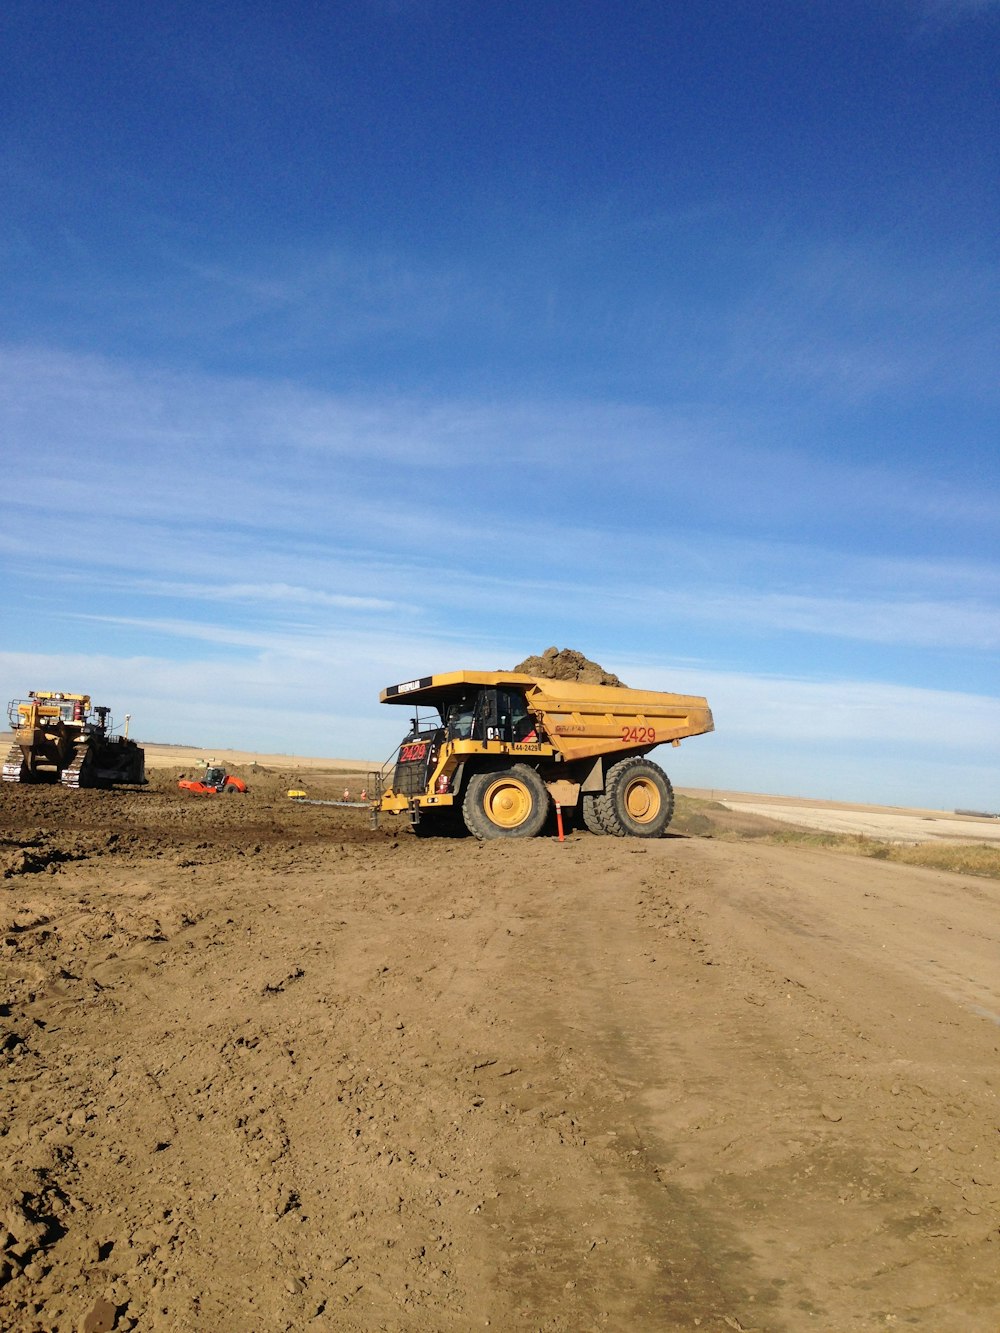 brown utility truck on brown sand under blue sky during daytime